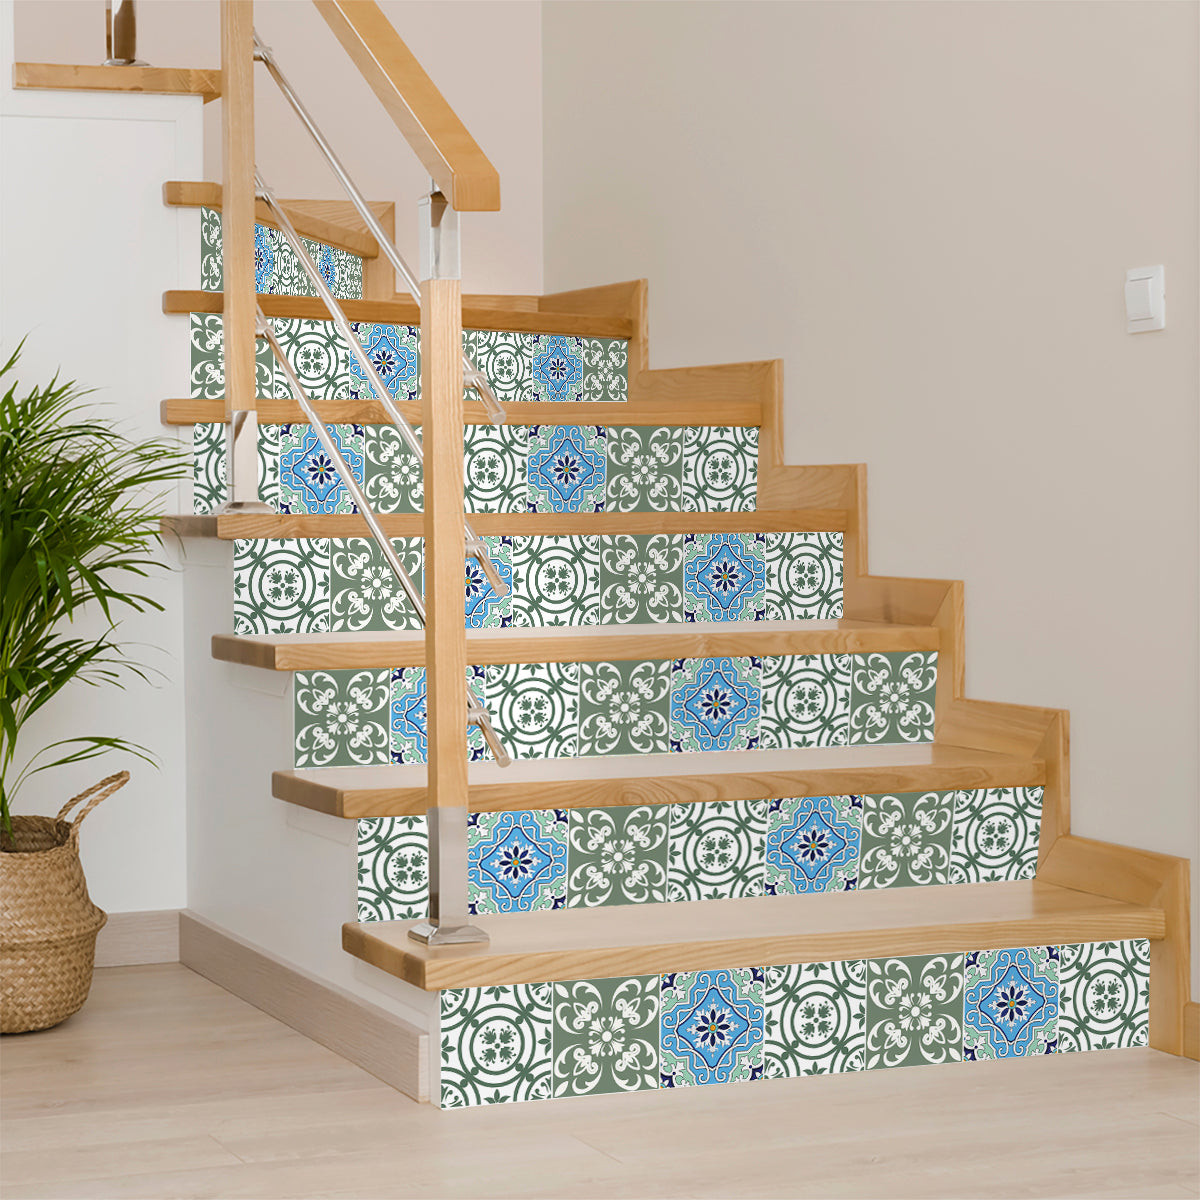 7" X 7" Sage And Aqua Floral Peel And Stick Removable Tiles-390886-1